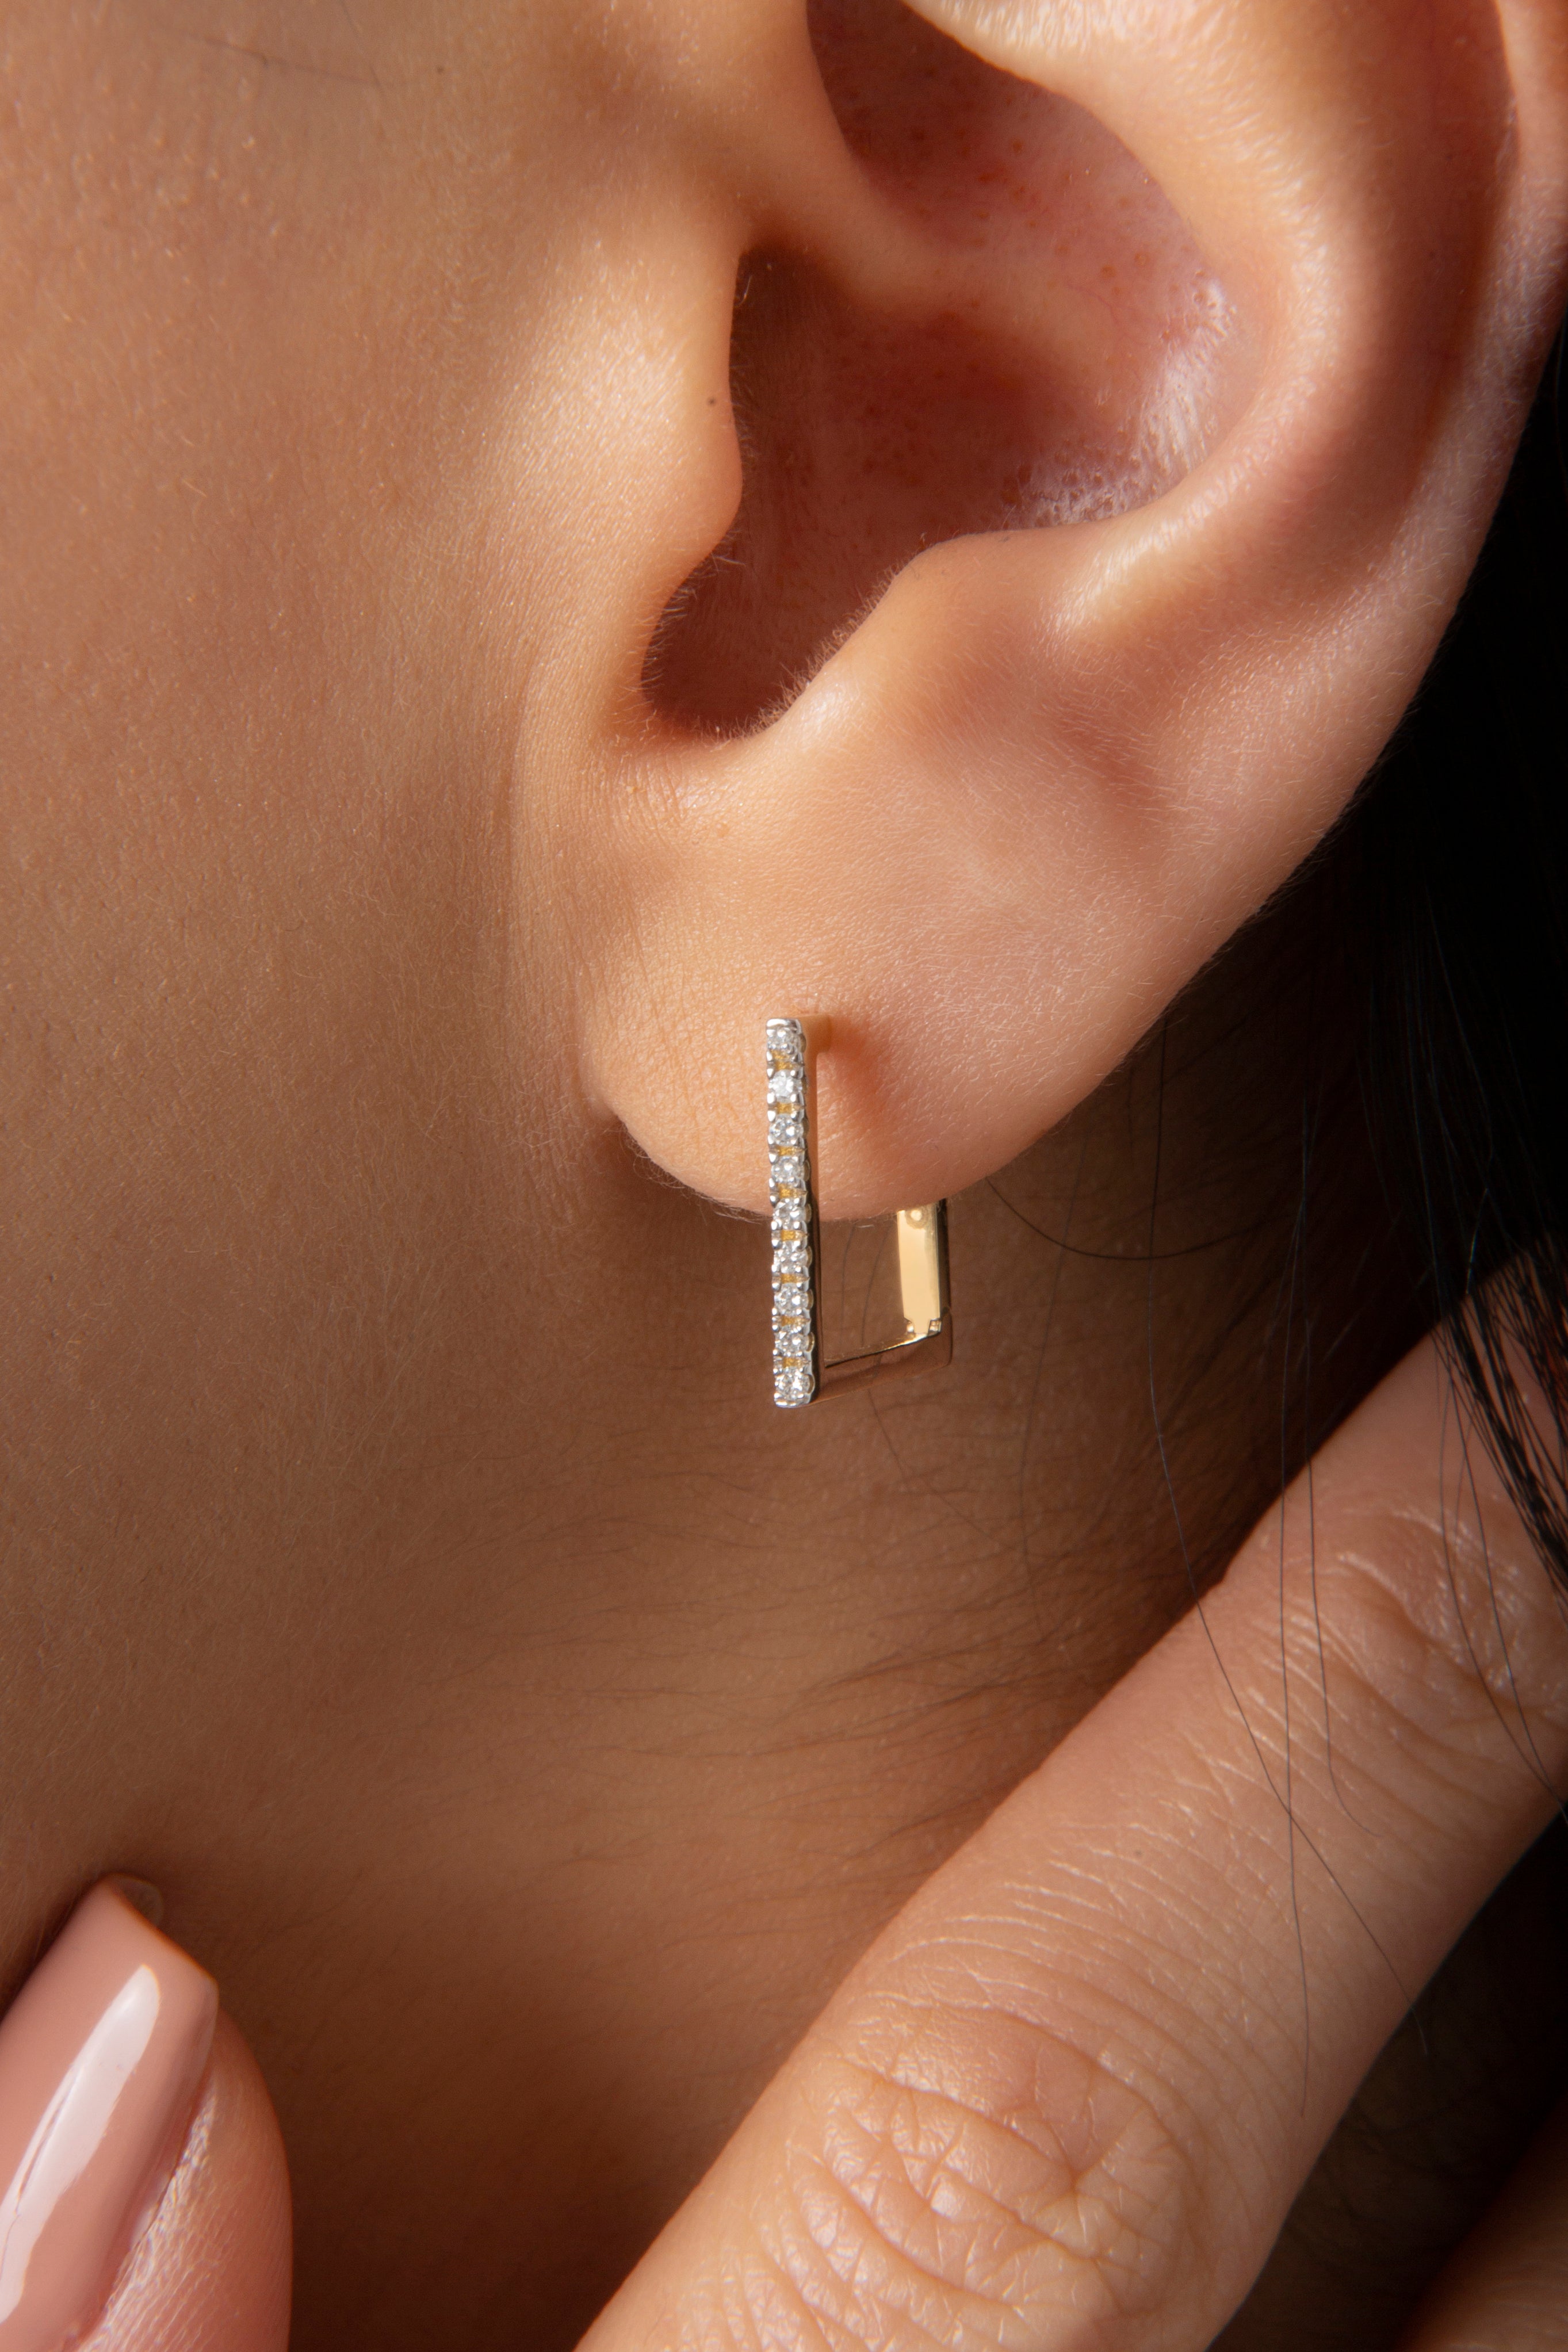 Mini Square Earring in Yellow Gold - Her Story Shop